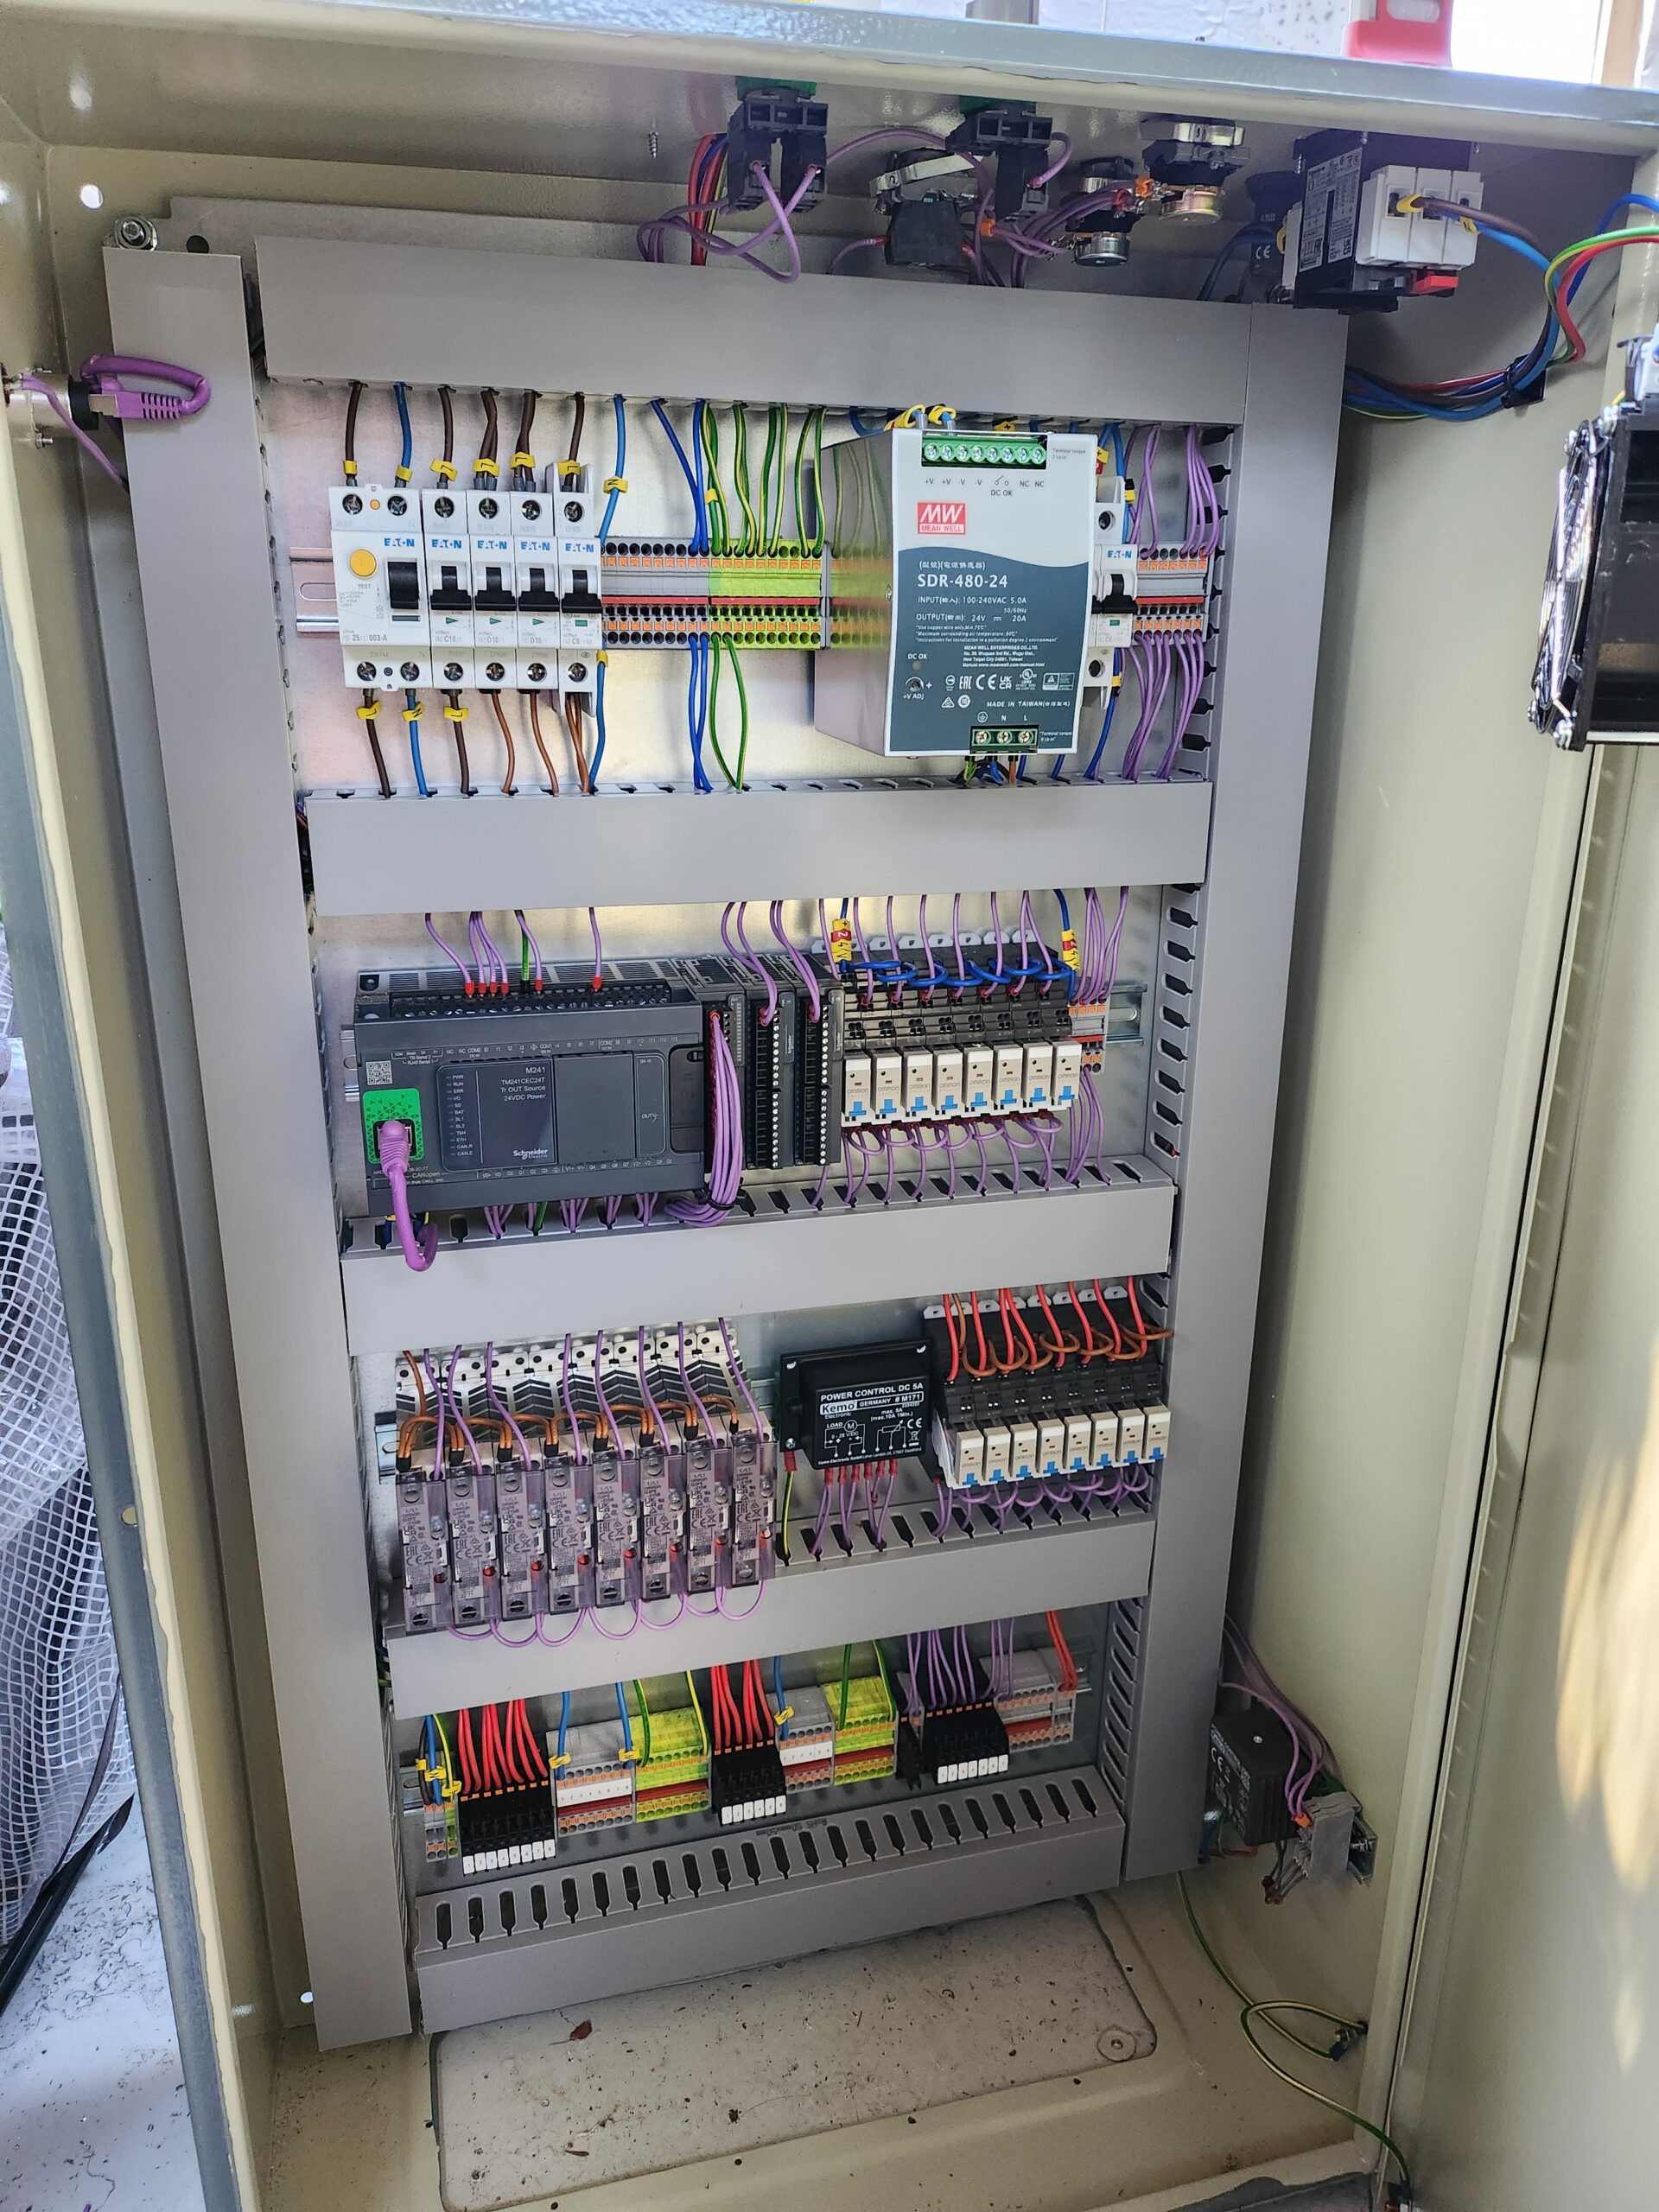 Schneider PLC panel with 24 channels of heater control. 